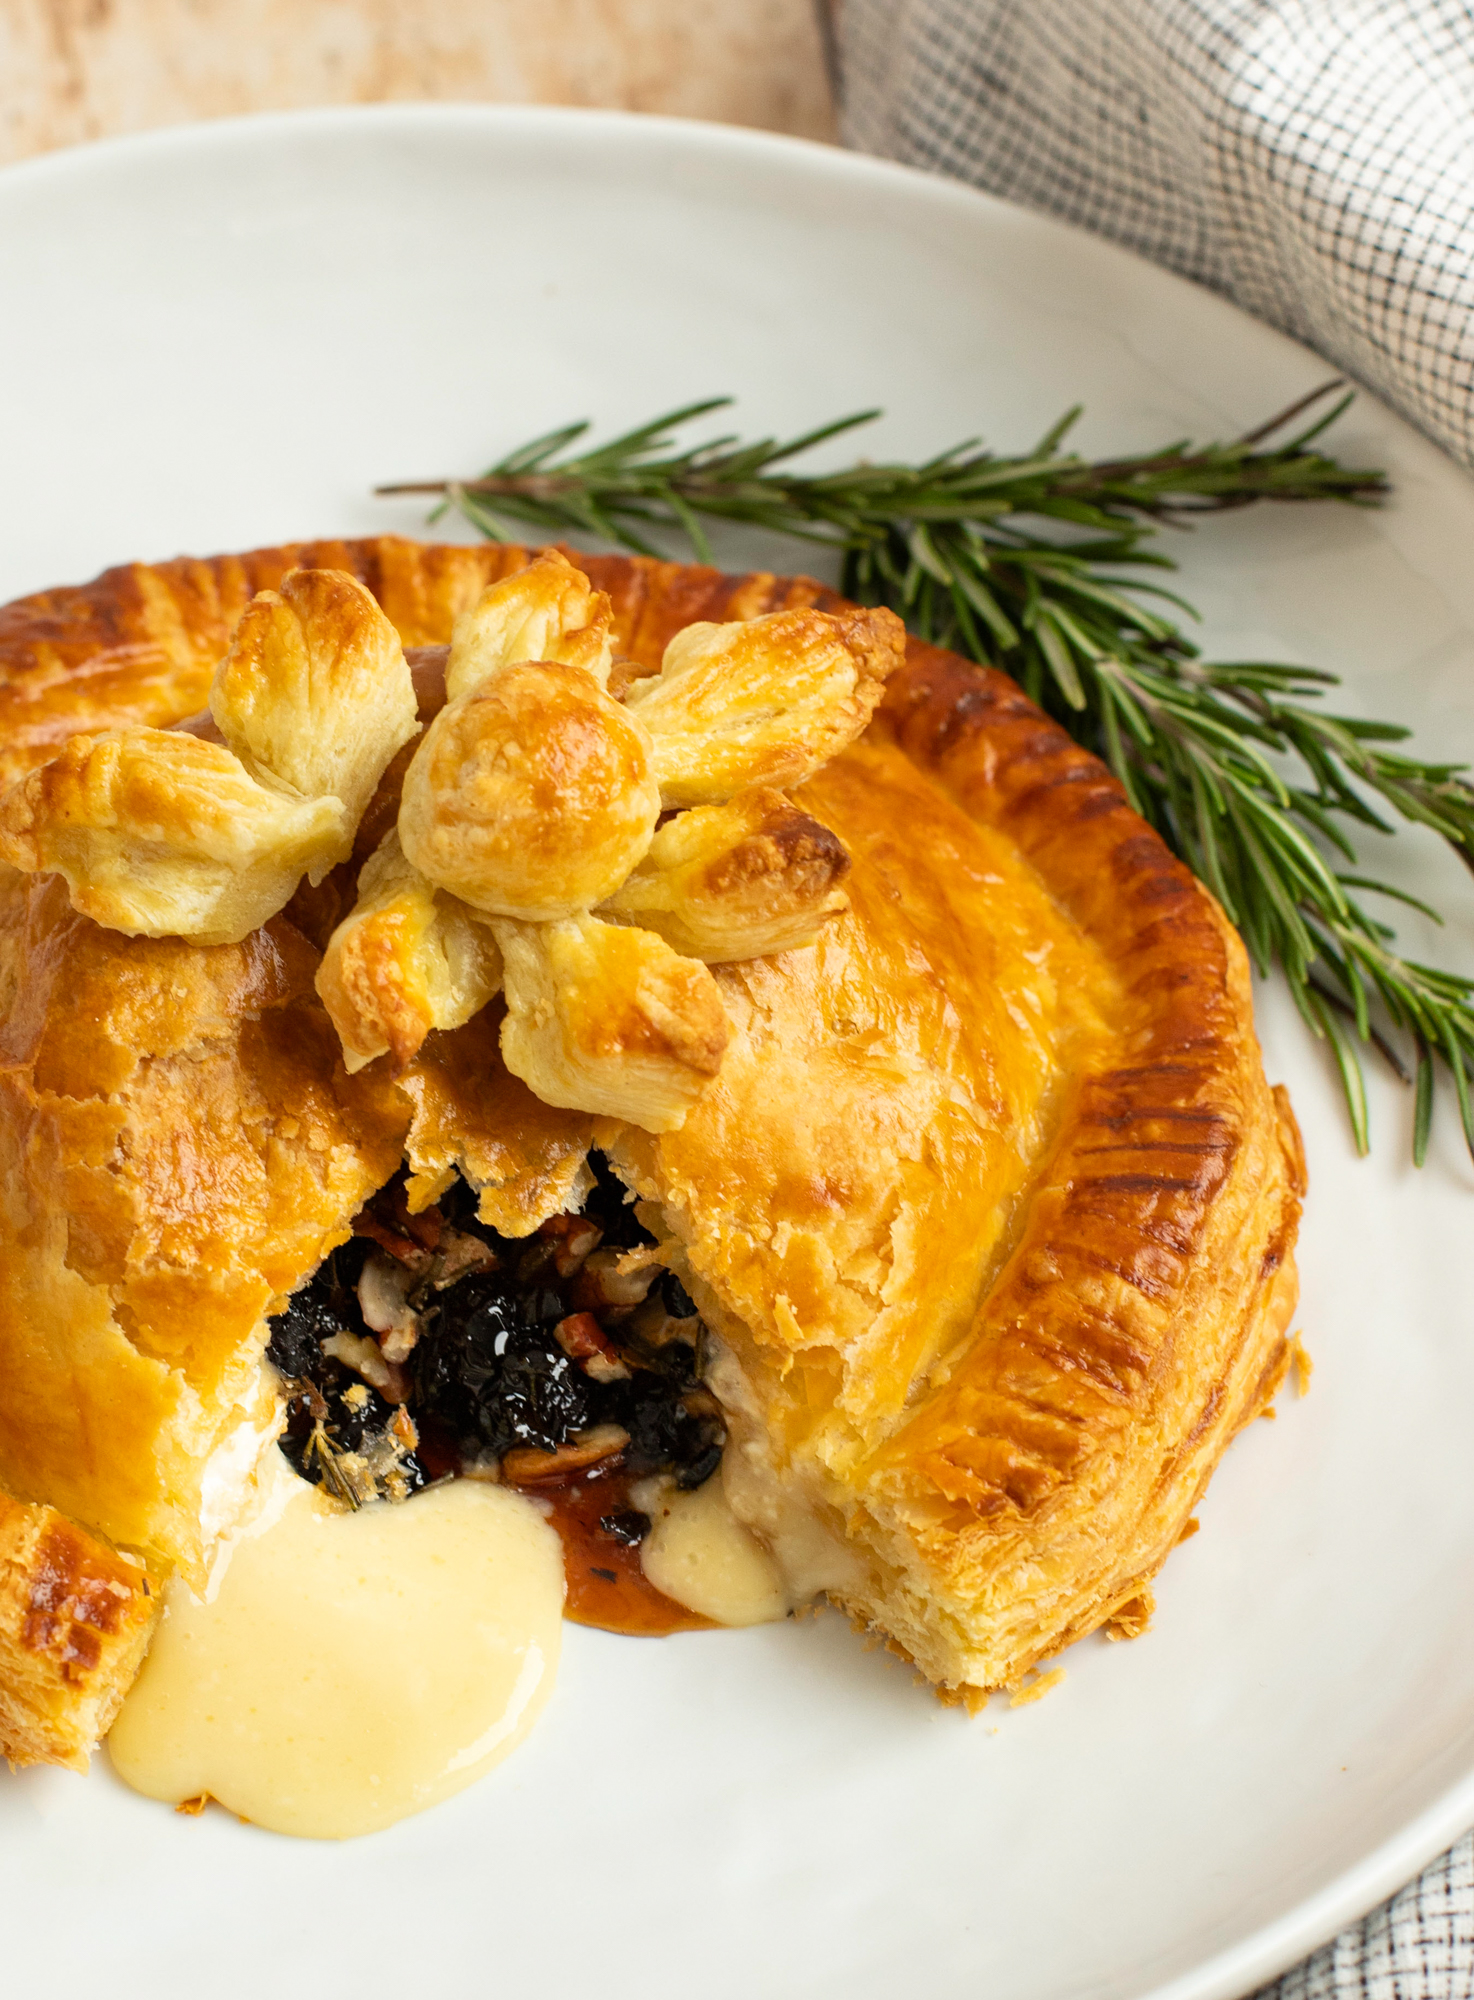 Cranberry And Pear Brie En Croute Recipe: Decadent Delight!